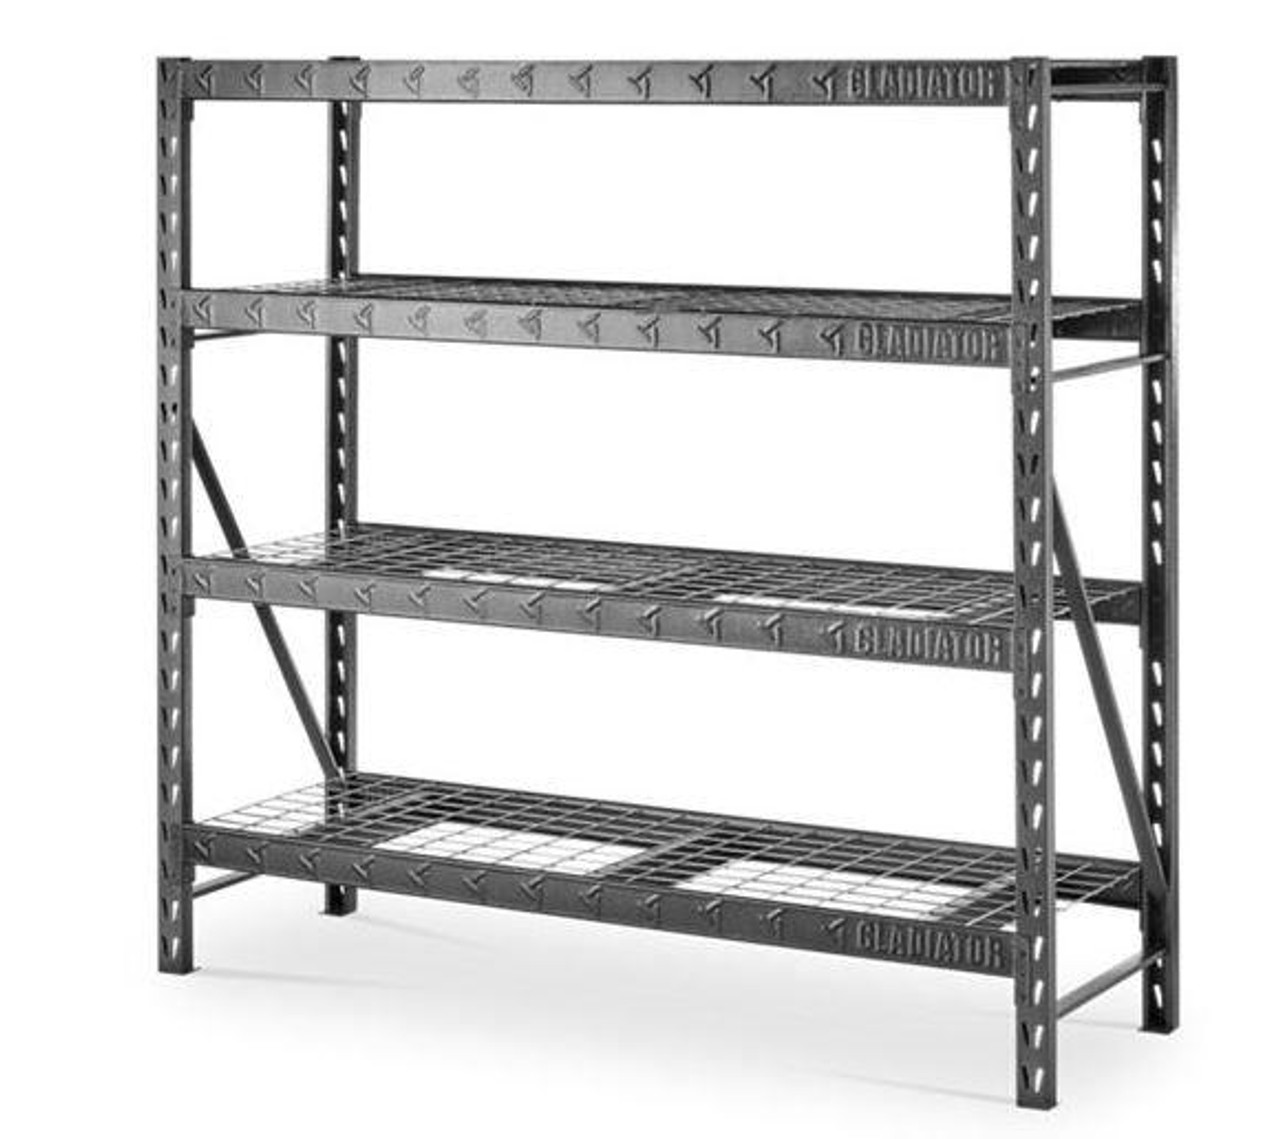 Gladiator 77 Wide Heavy Duty Rack with Four 24 Deep Shelves